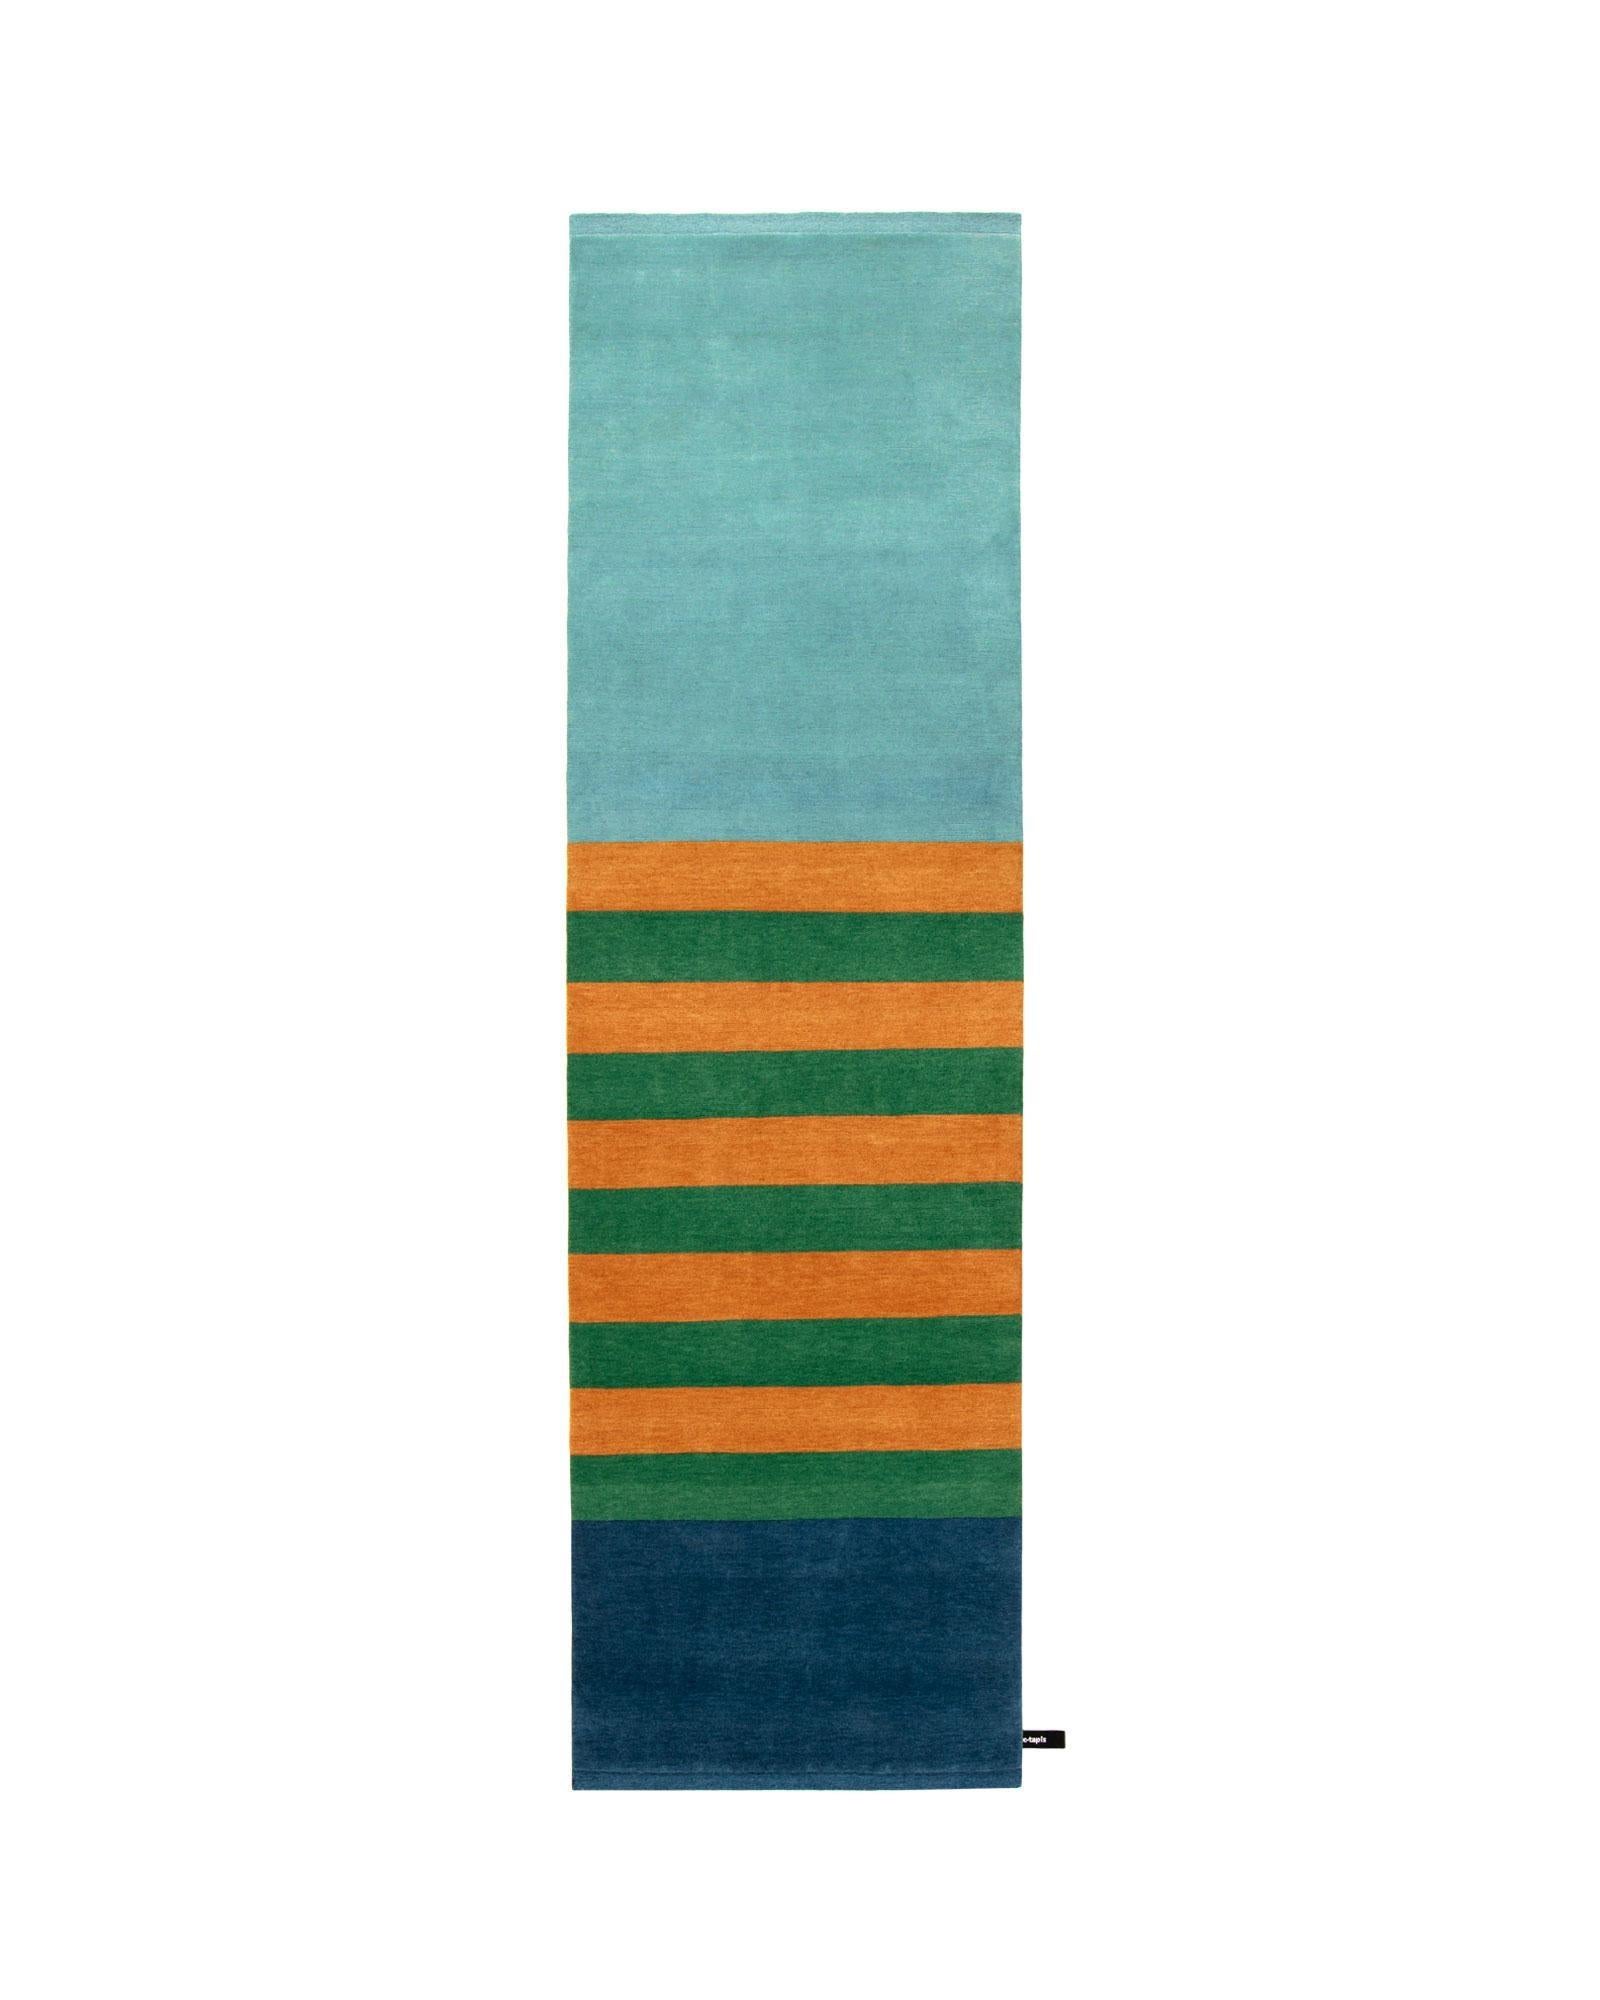 Nepalese cc-tapis Vert Apricot Les Arcs Collection by Charlotte Perriand - IN STOCK For Sale